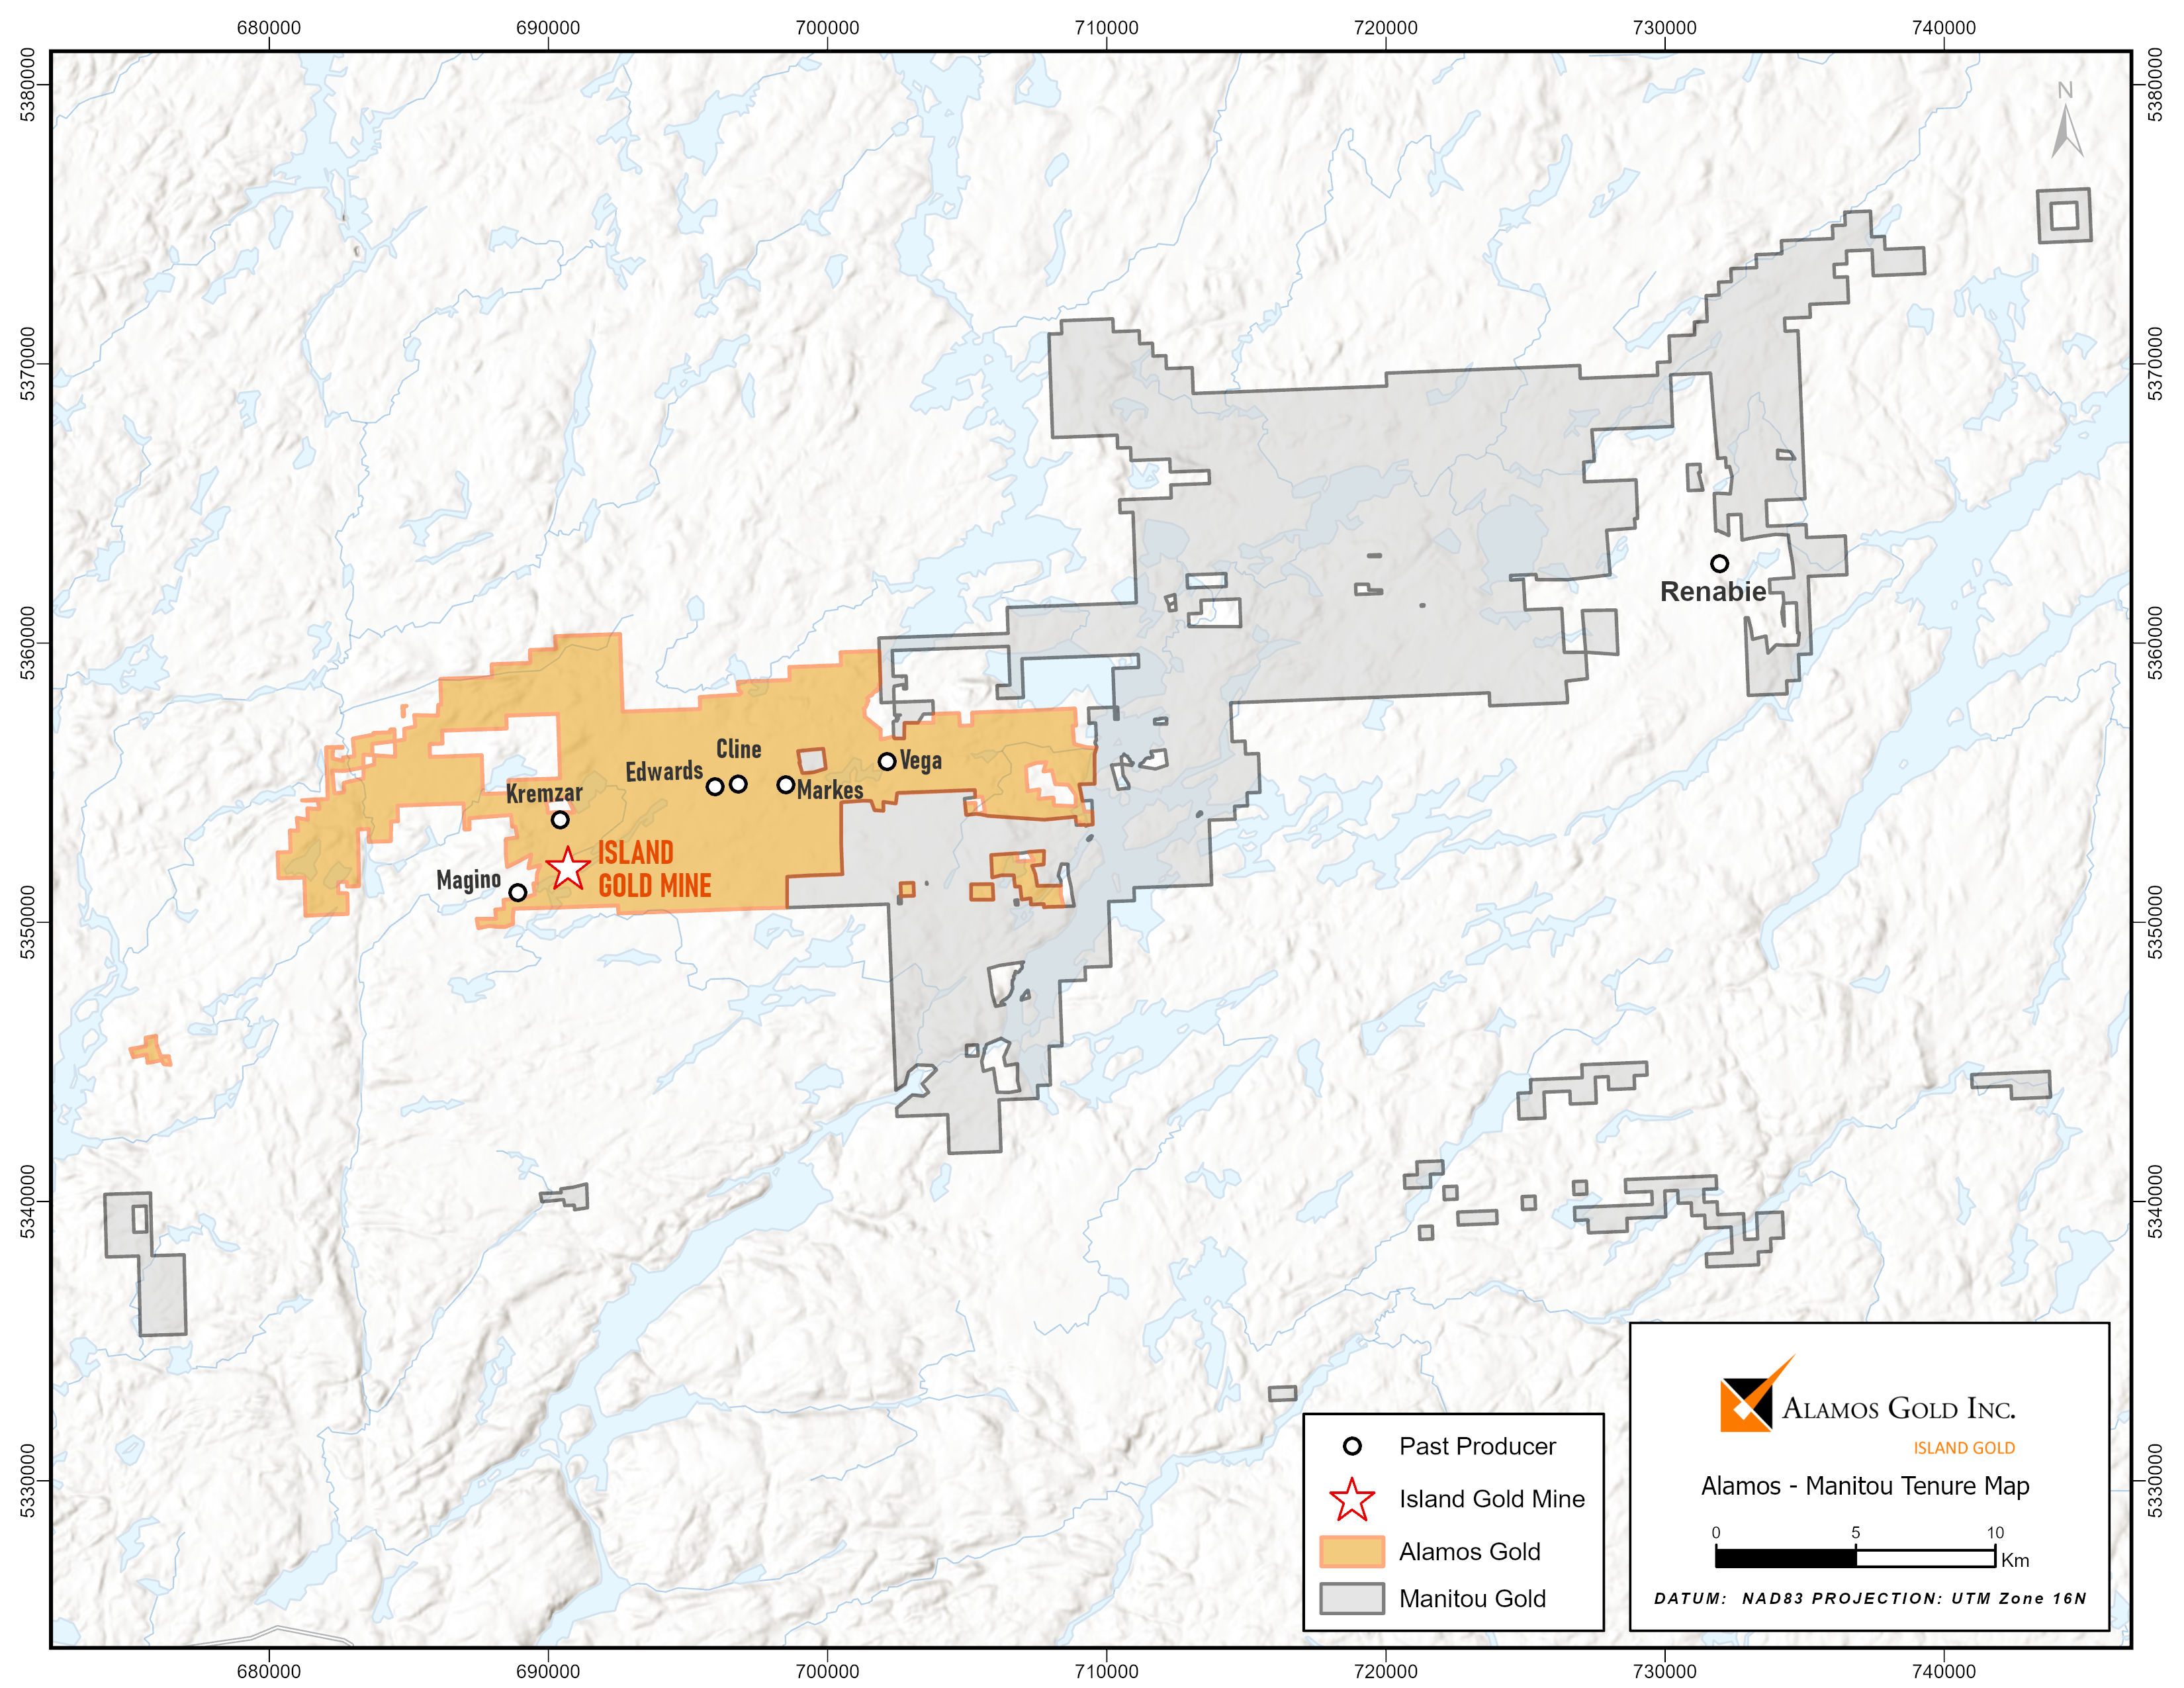 Figure 1 Alamos Gold and Manitou Gold Land Tenure Map